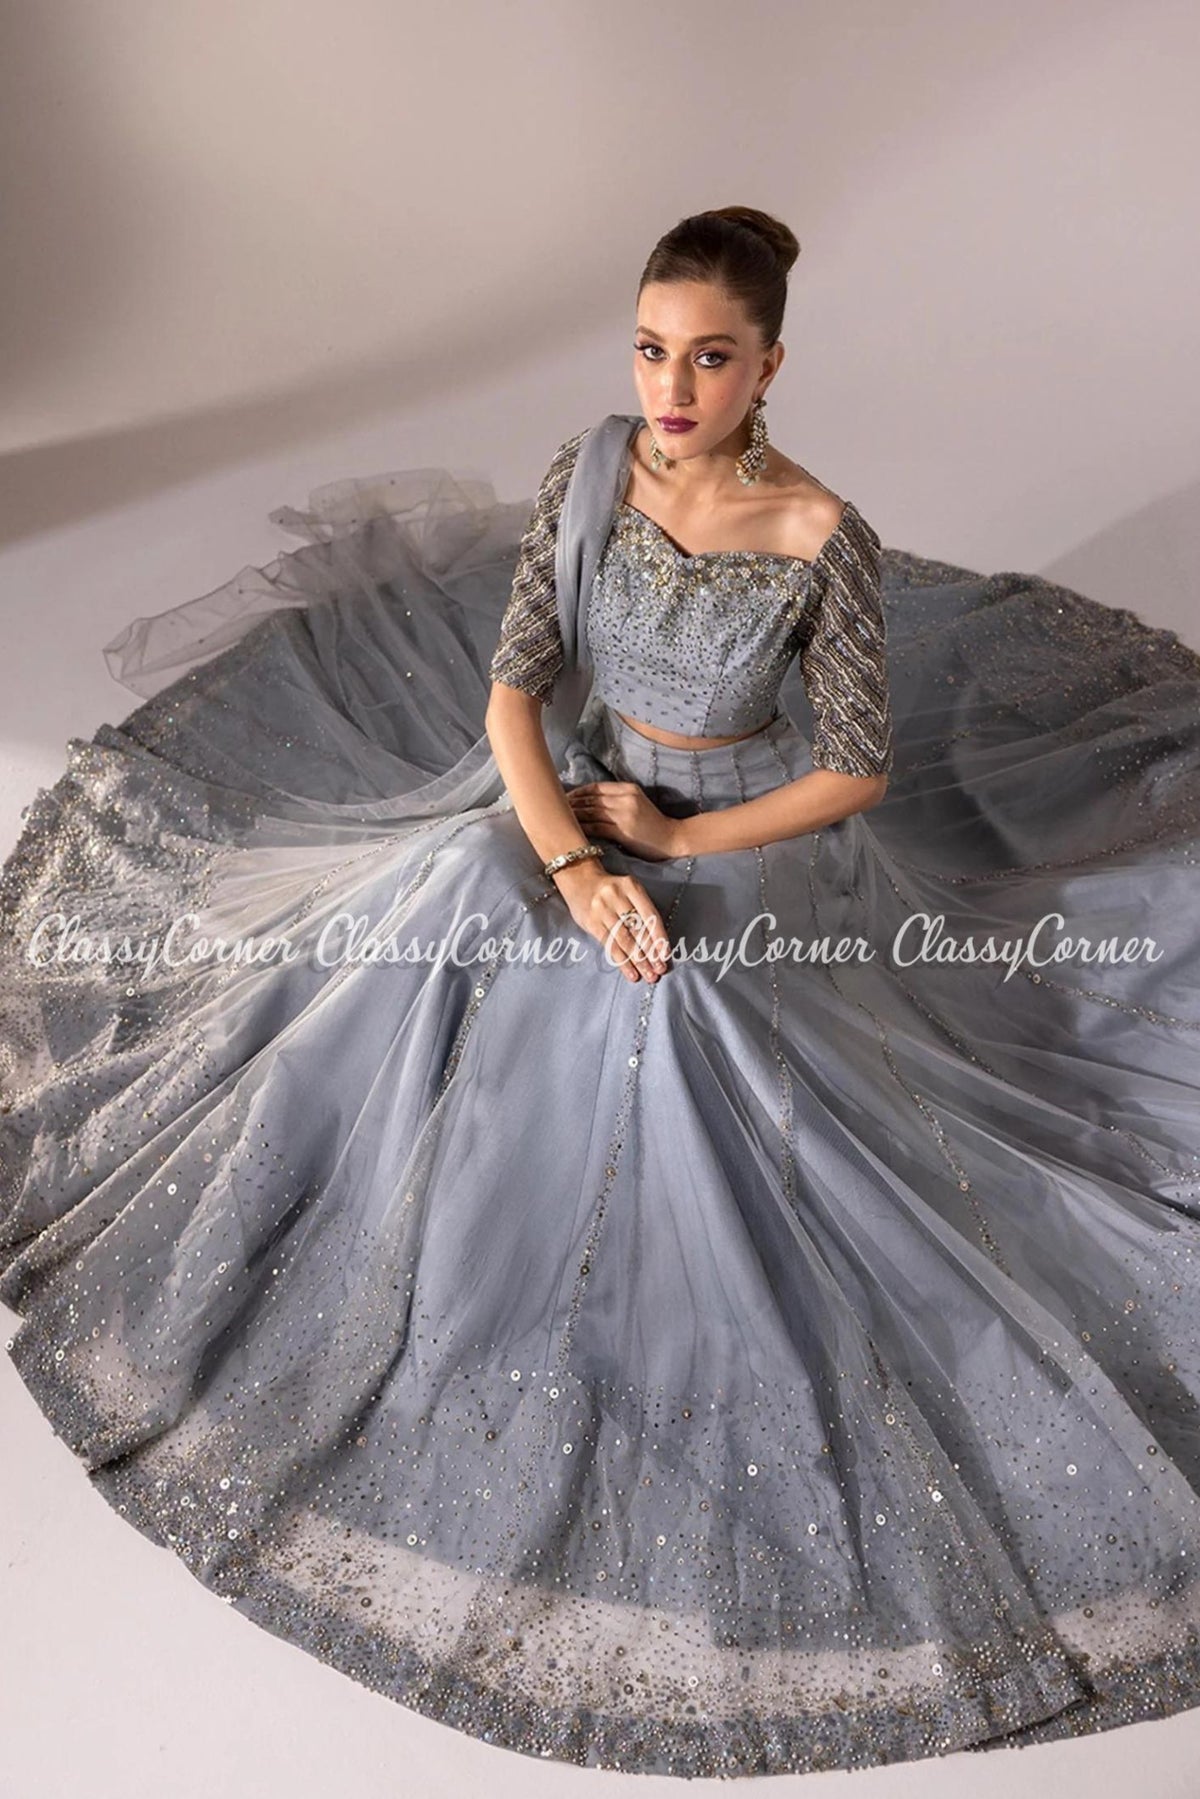 Grey Silver Net Embroidered Readymade Lehenga Choli Outfit